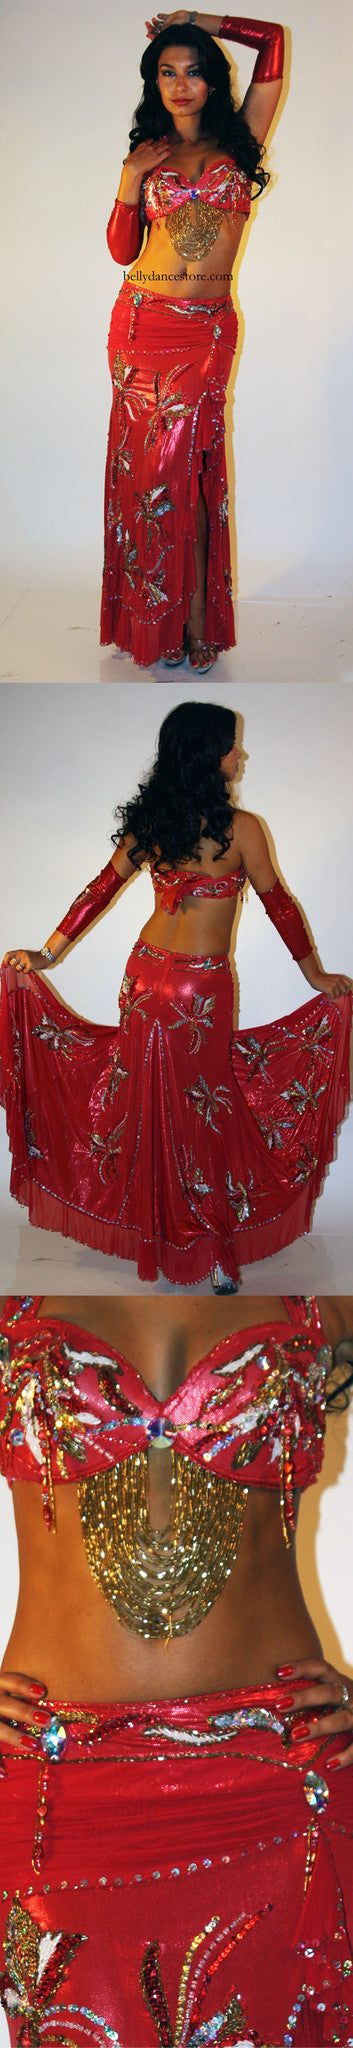 Two-Piece Costume